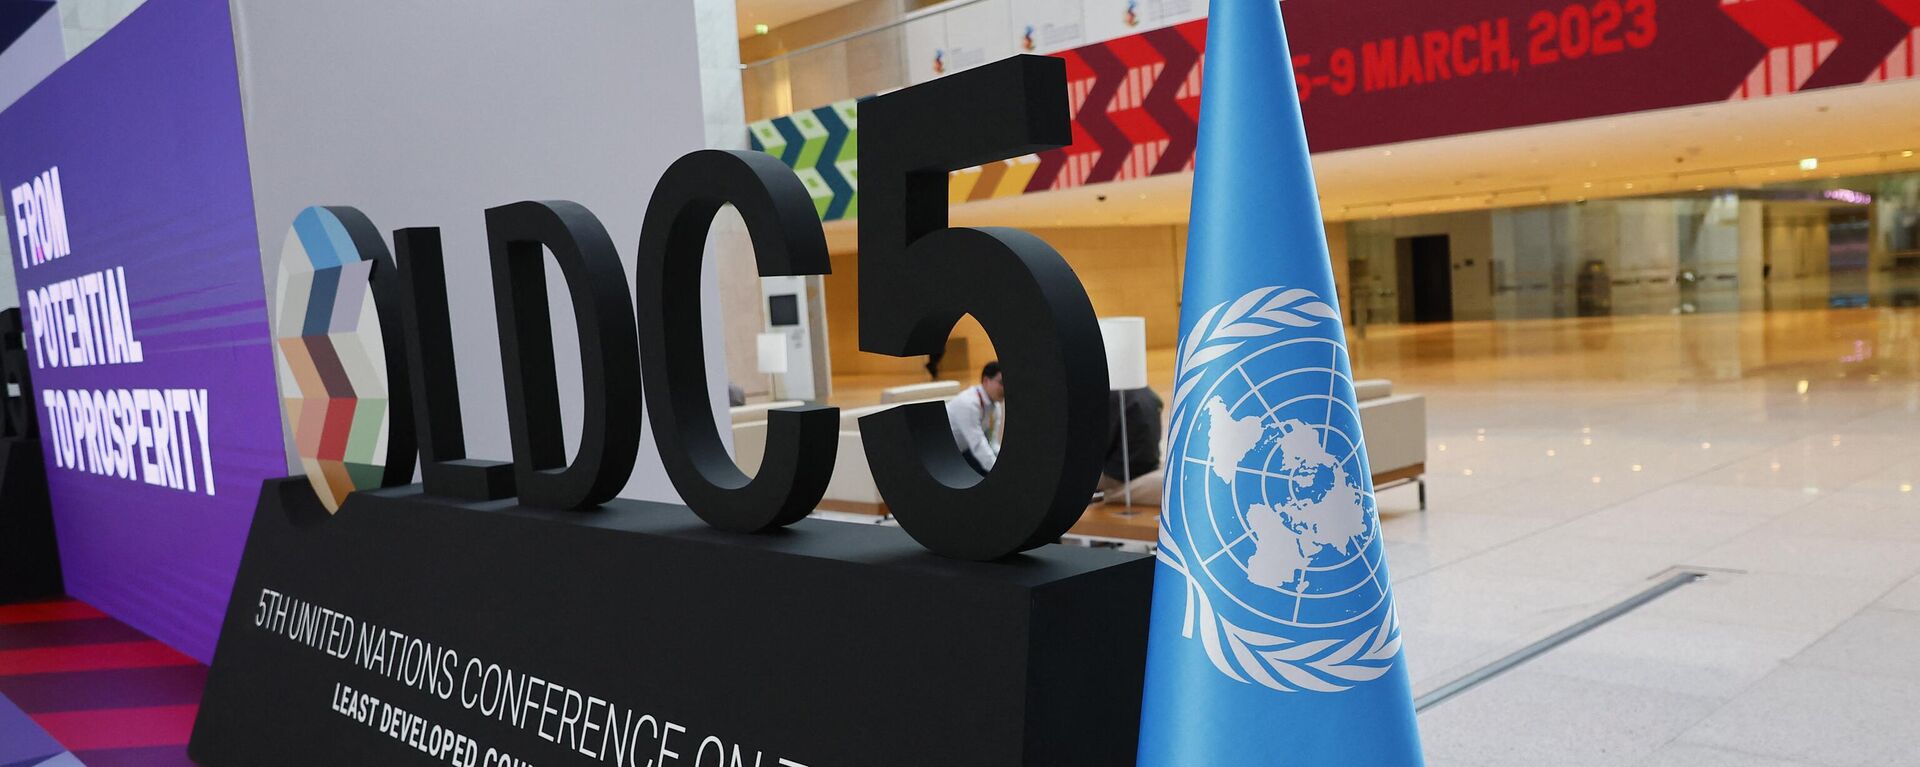 The LDC5 logo is set up during preparations for the 5th United Nations Conference on the Least Developed Countries (LDC5) at Qatar National Convention Center (QNCC) in Doha on March 3, 2023.  - Sputnik International, 1920, 15.03.2023